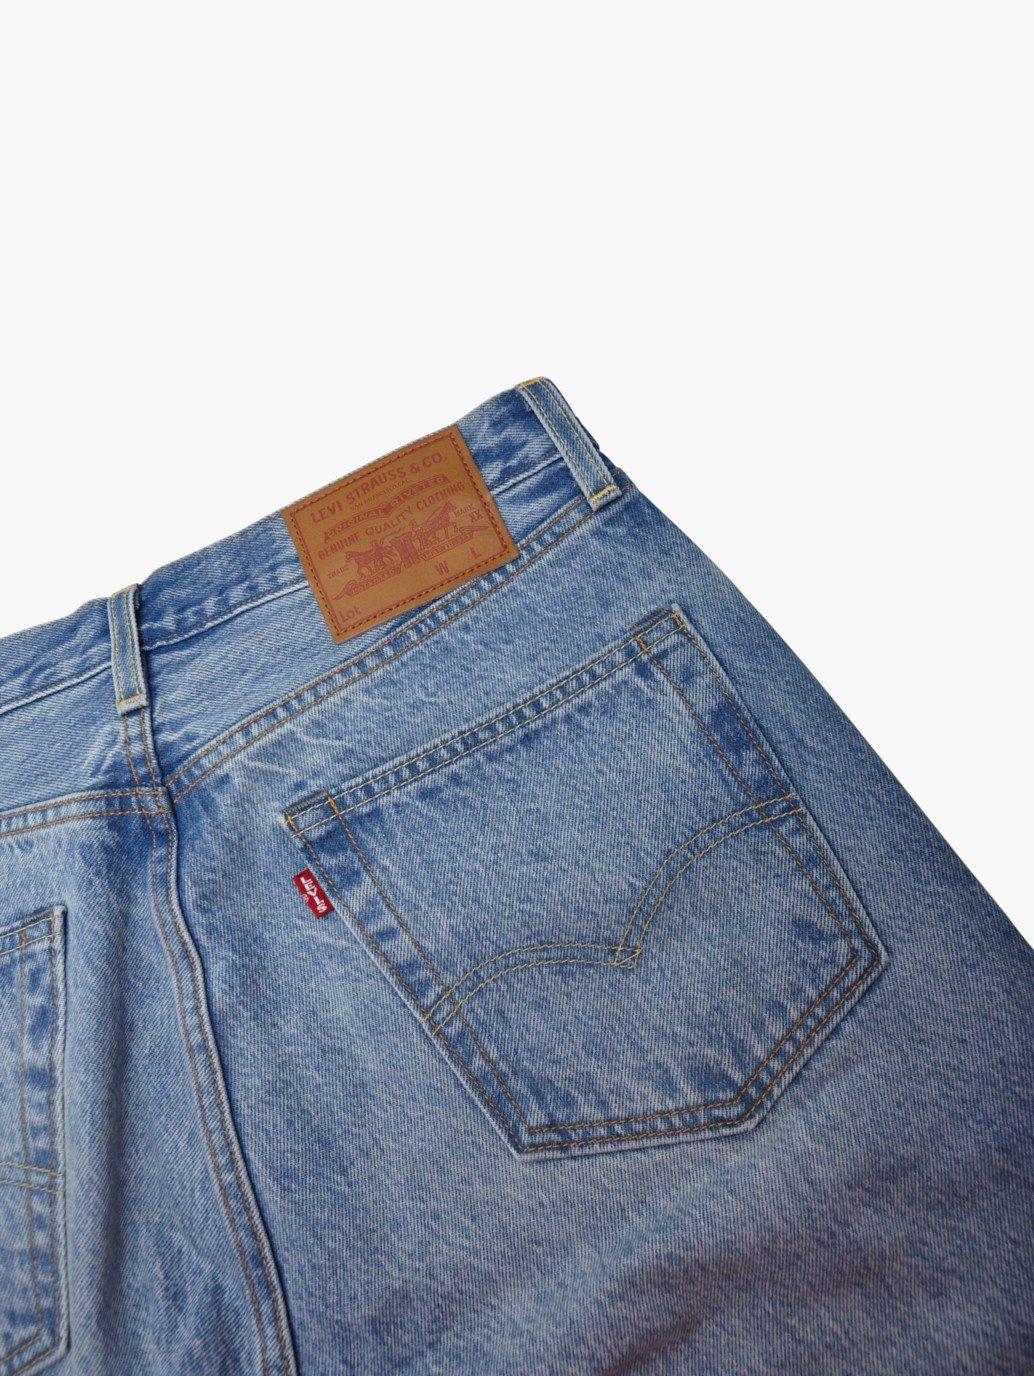 levis malaysia mens 501 54 jeans A46770006 18 Details